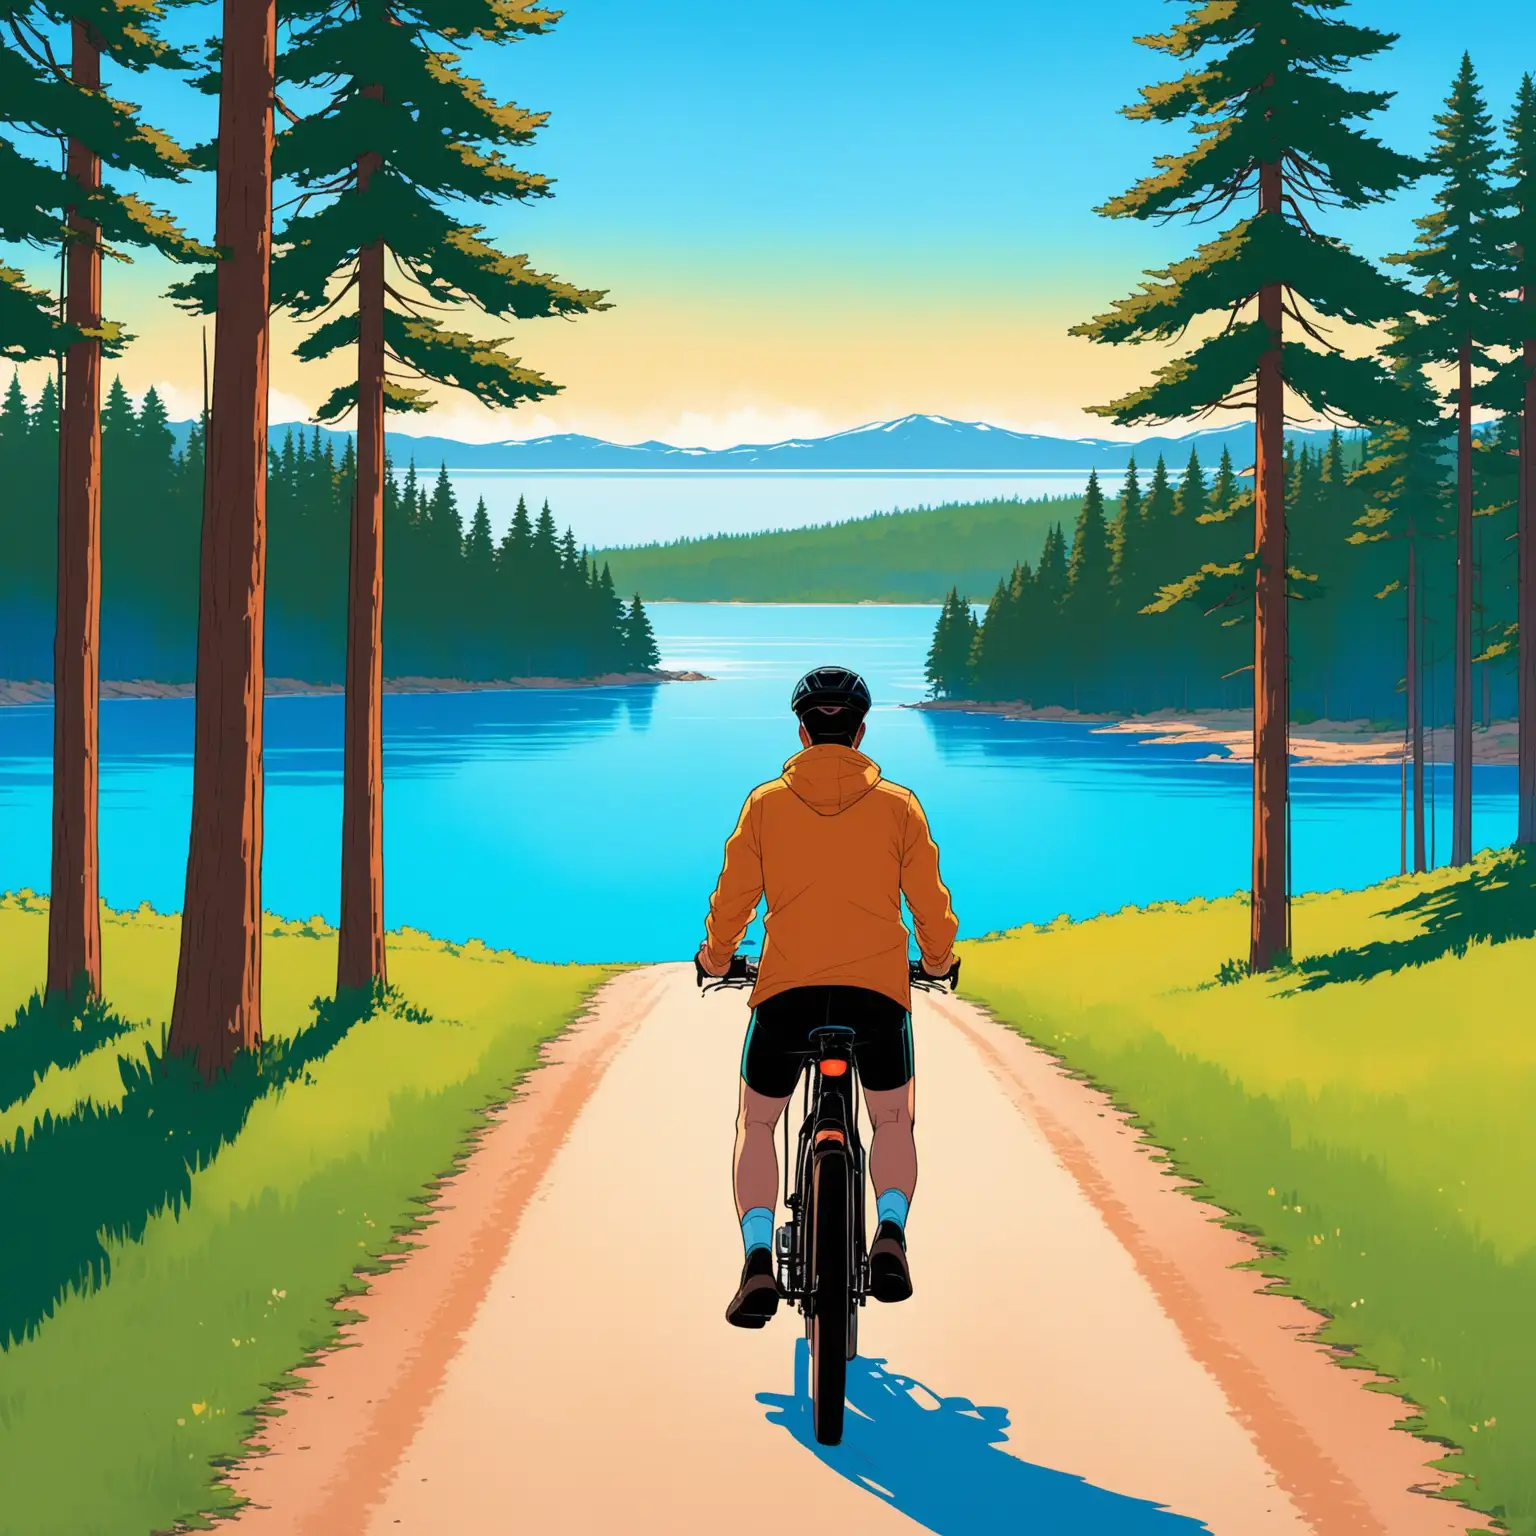 Man Cycling on Trail Towards Blue Lake with Pine Trees